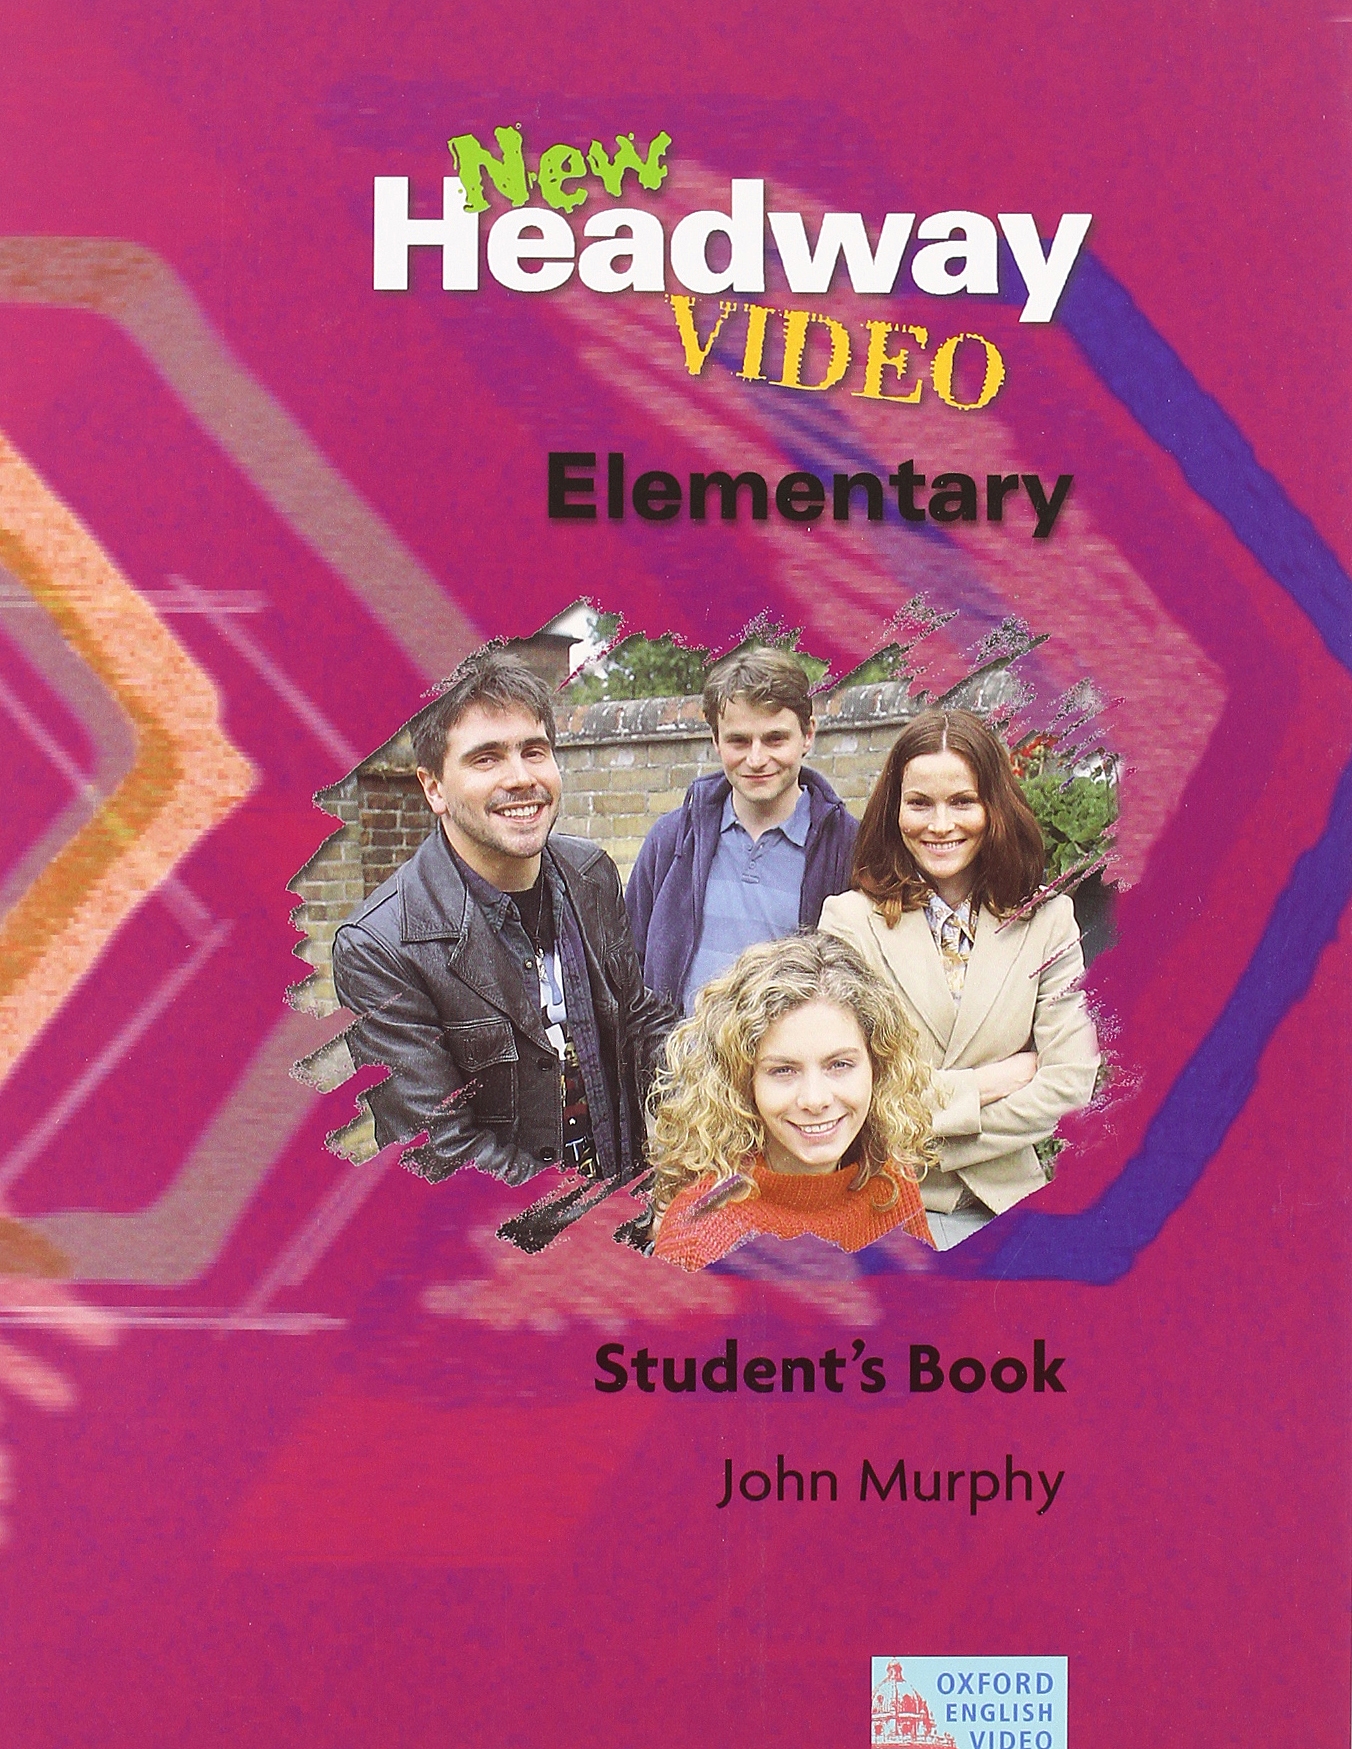 NEW HEADWAY VIDEO ELEMENTARY  Student's Book